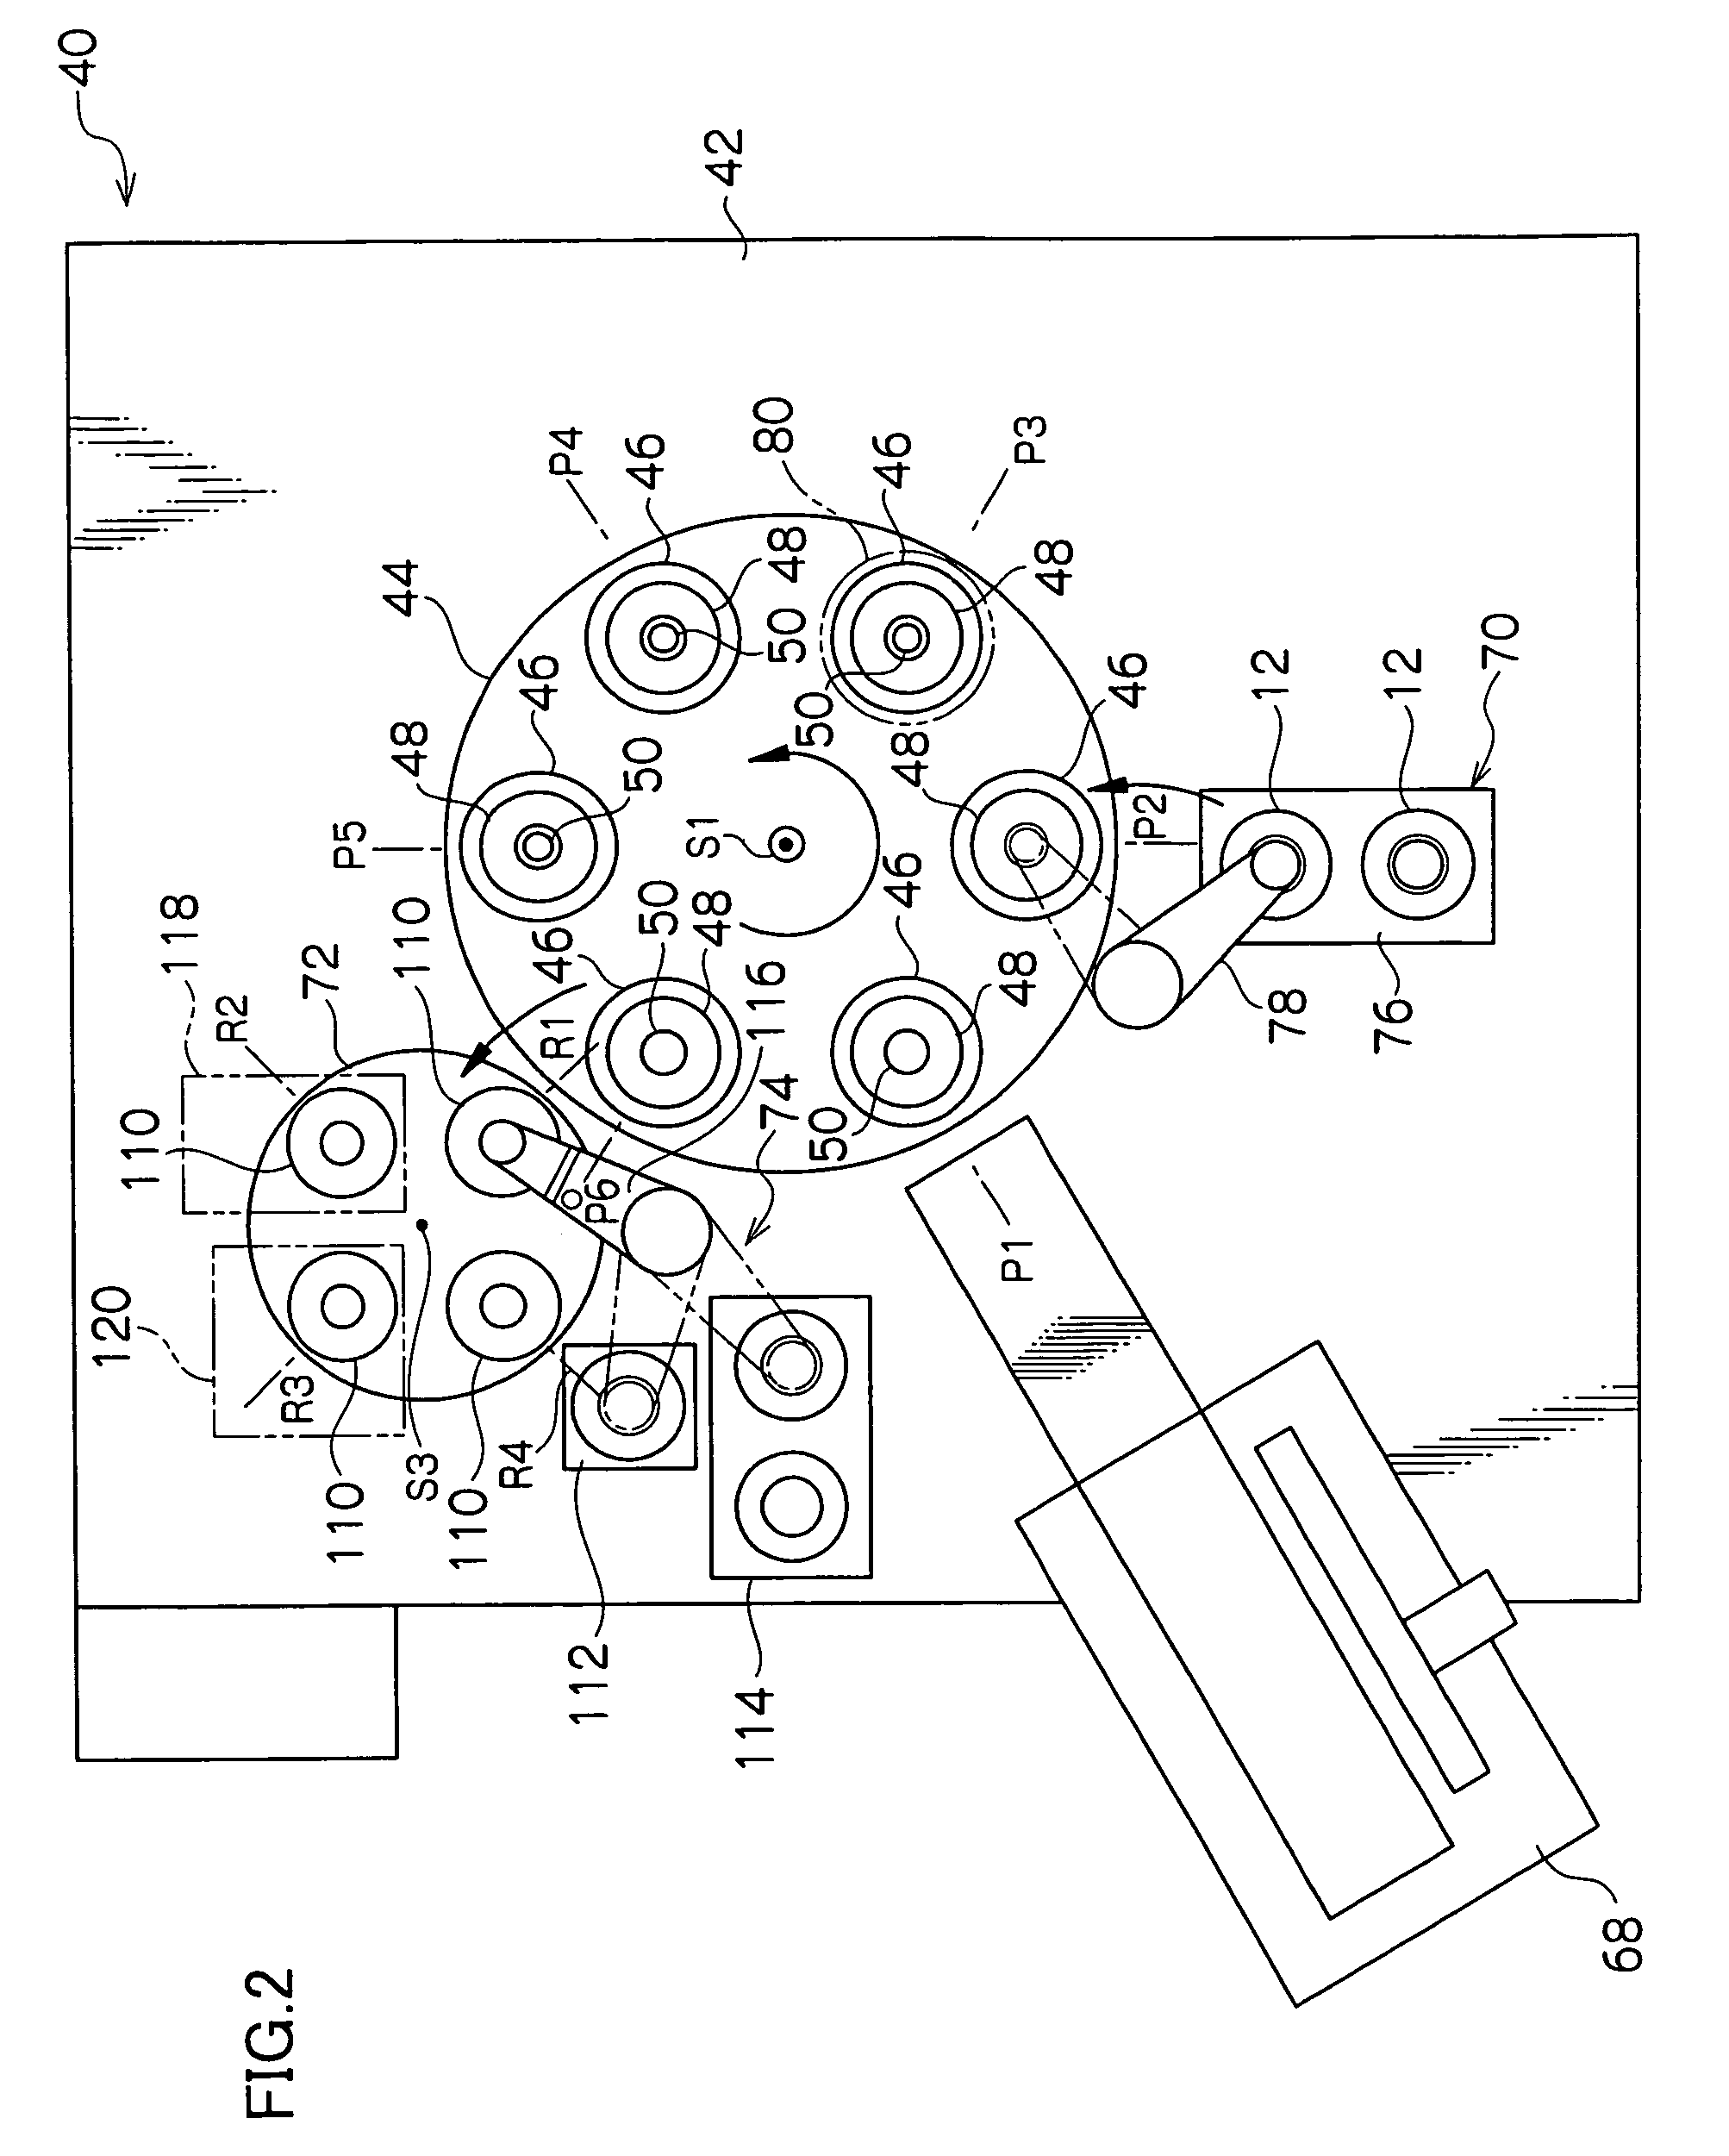 Alignment device for fabricating optical disk